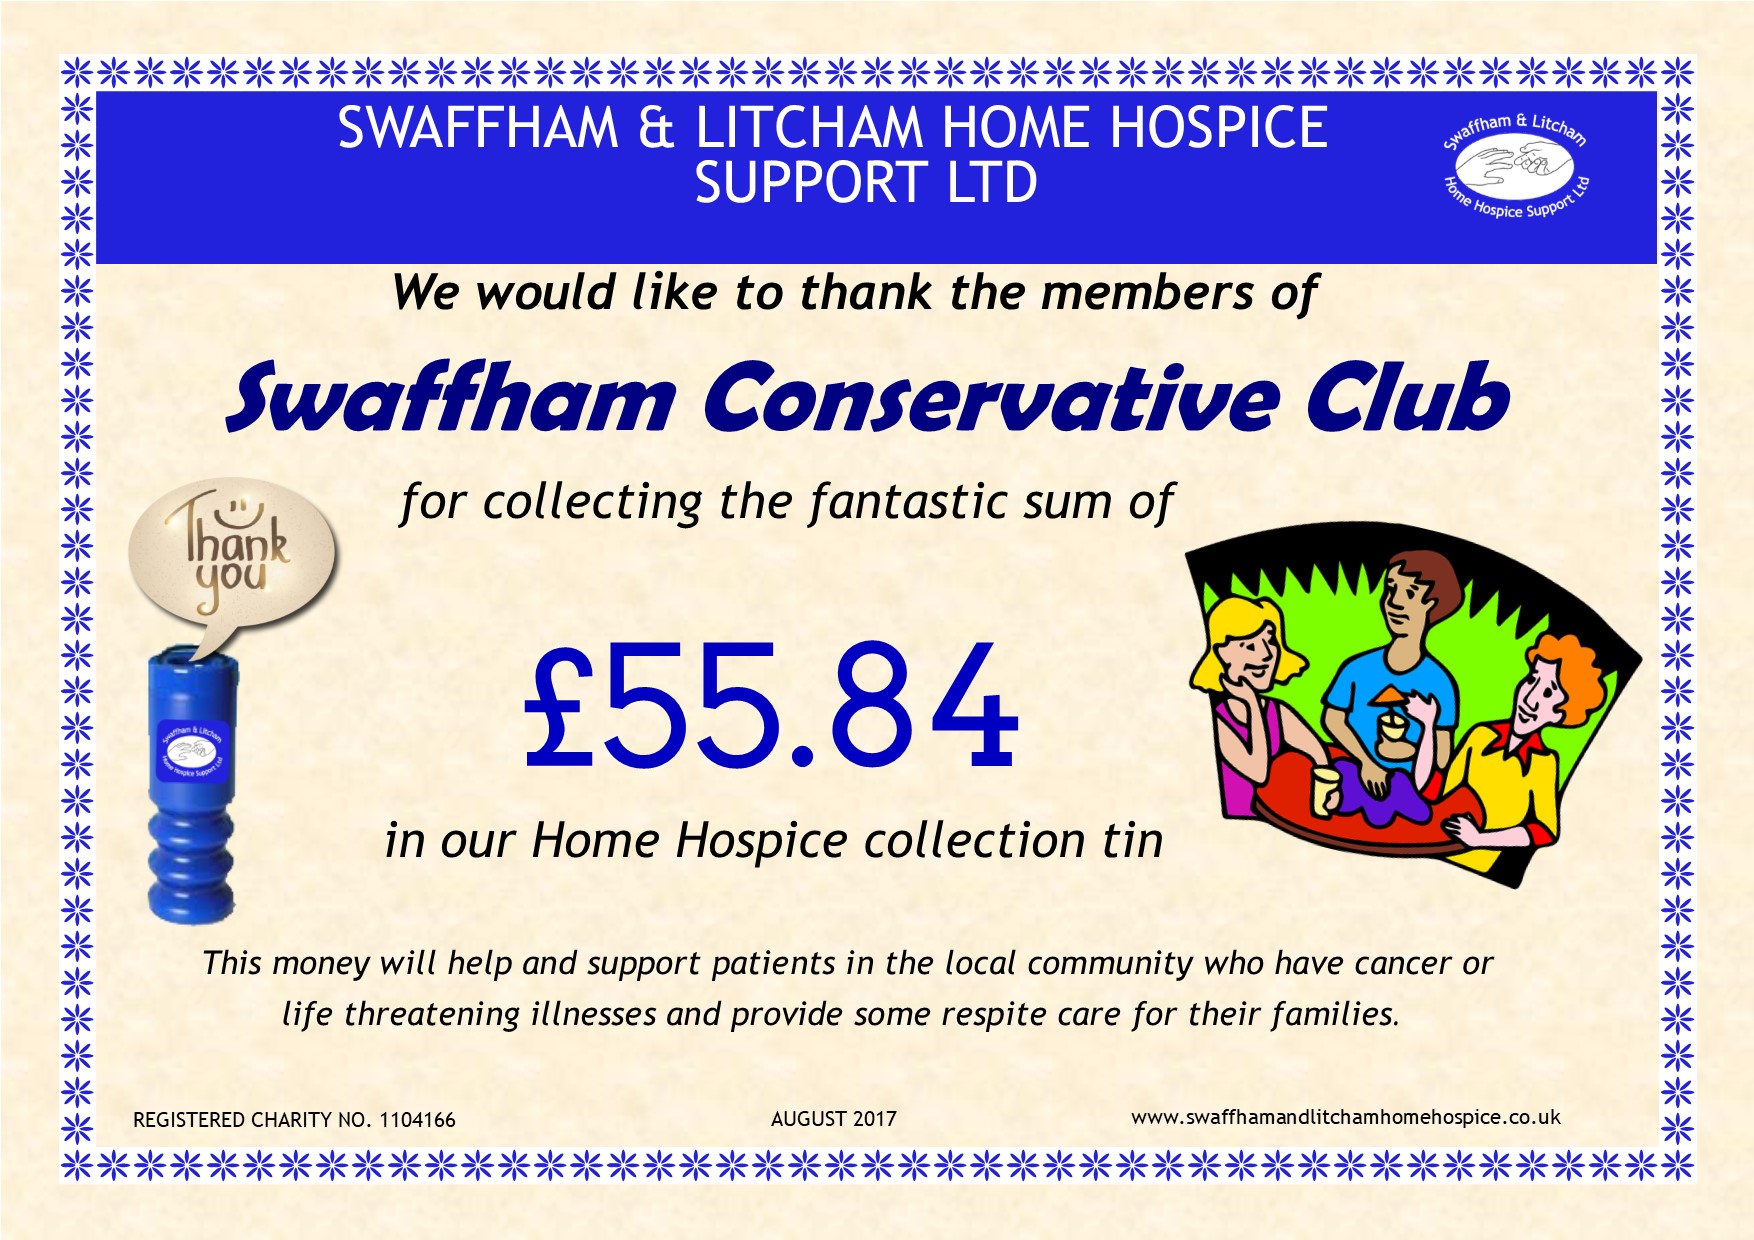 Money raised by Members and Staff at Swaffham Conservative Club, August 2017